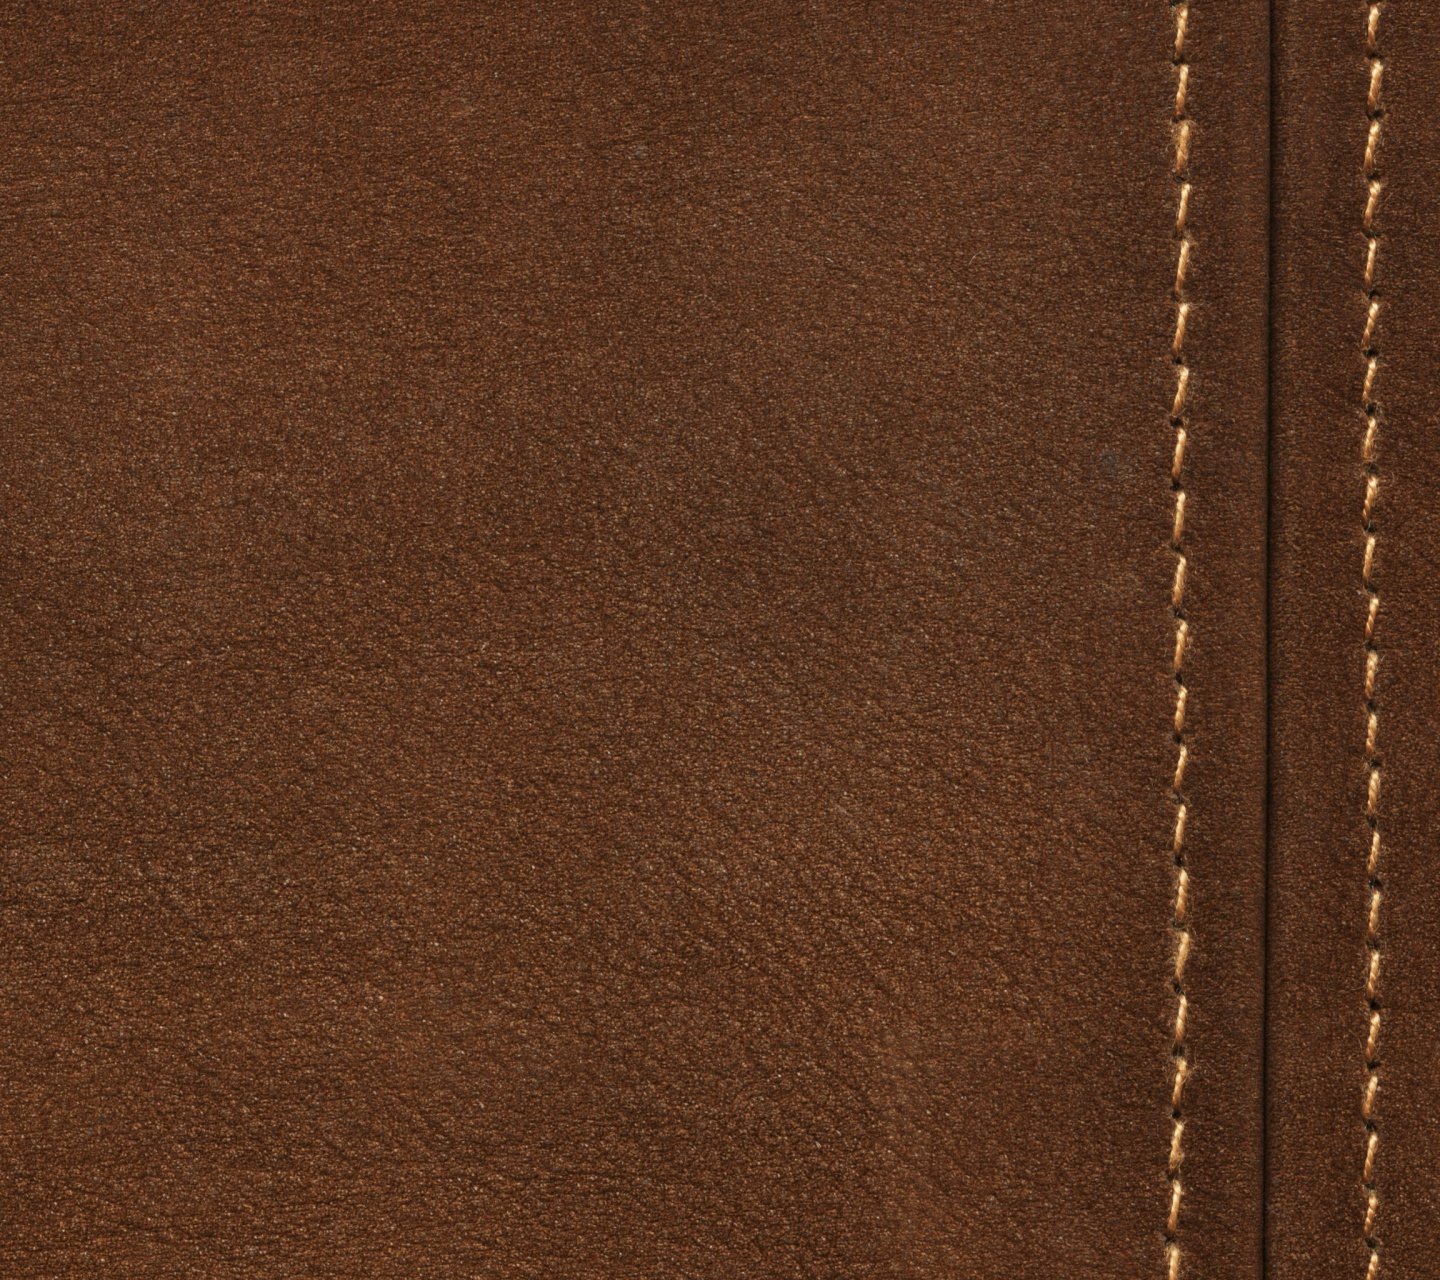 Das Brown Leather with Seam Wallpaper 1440x1280